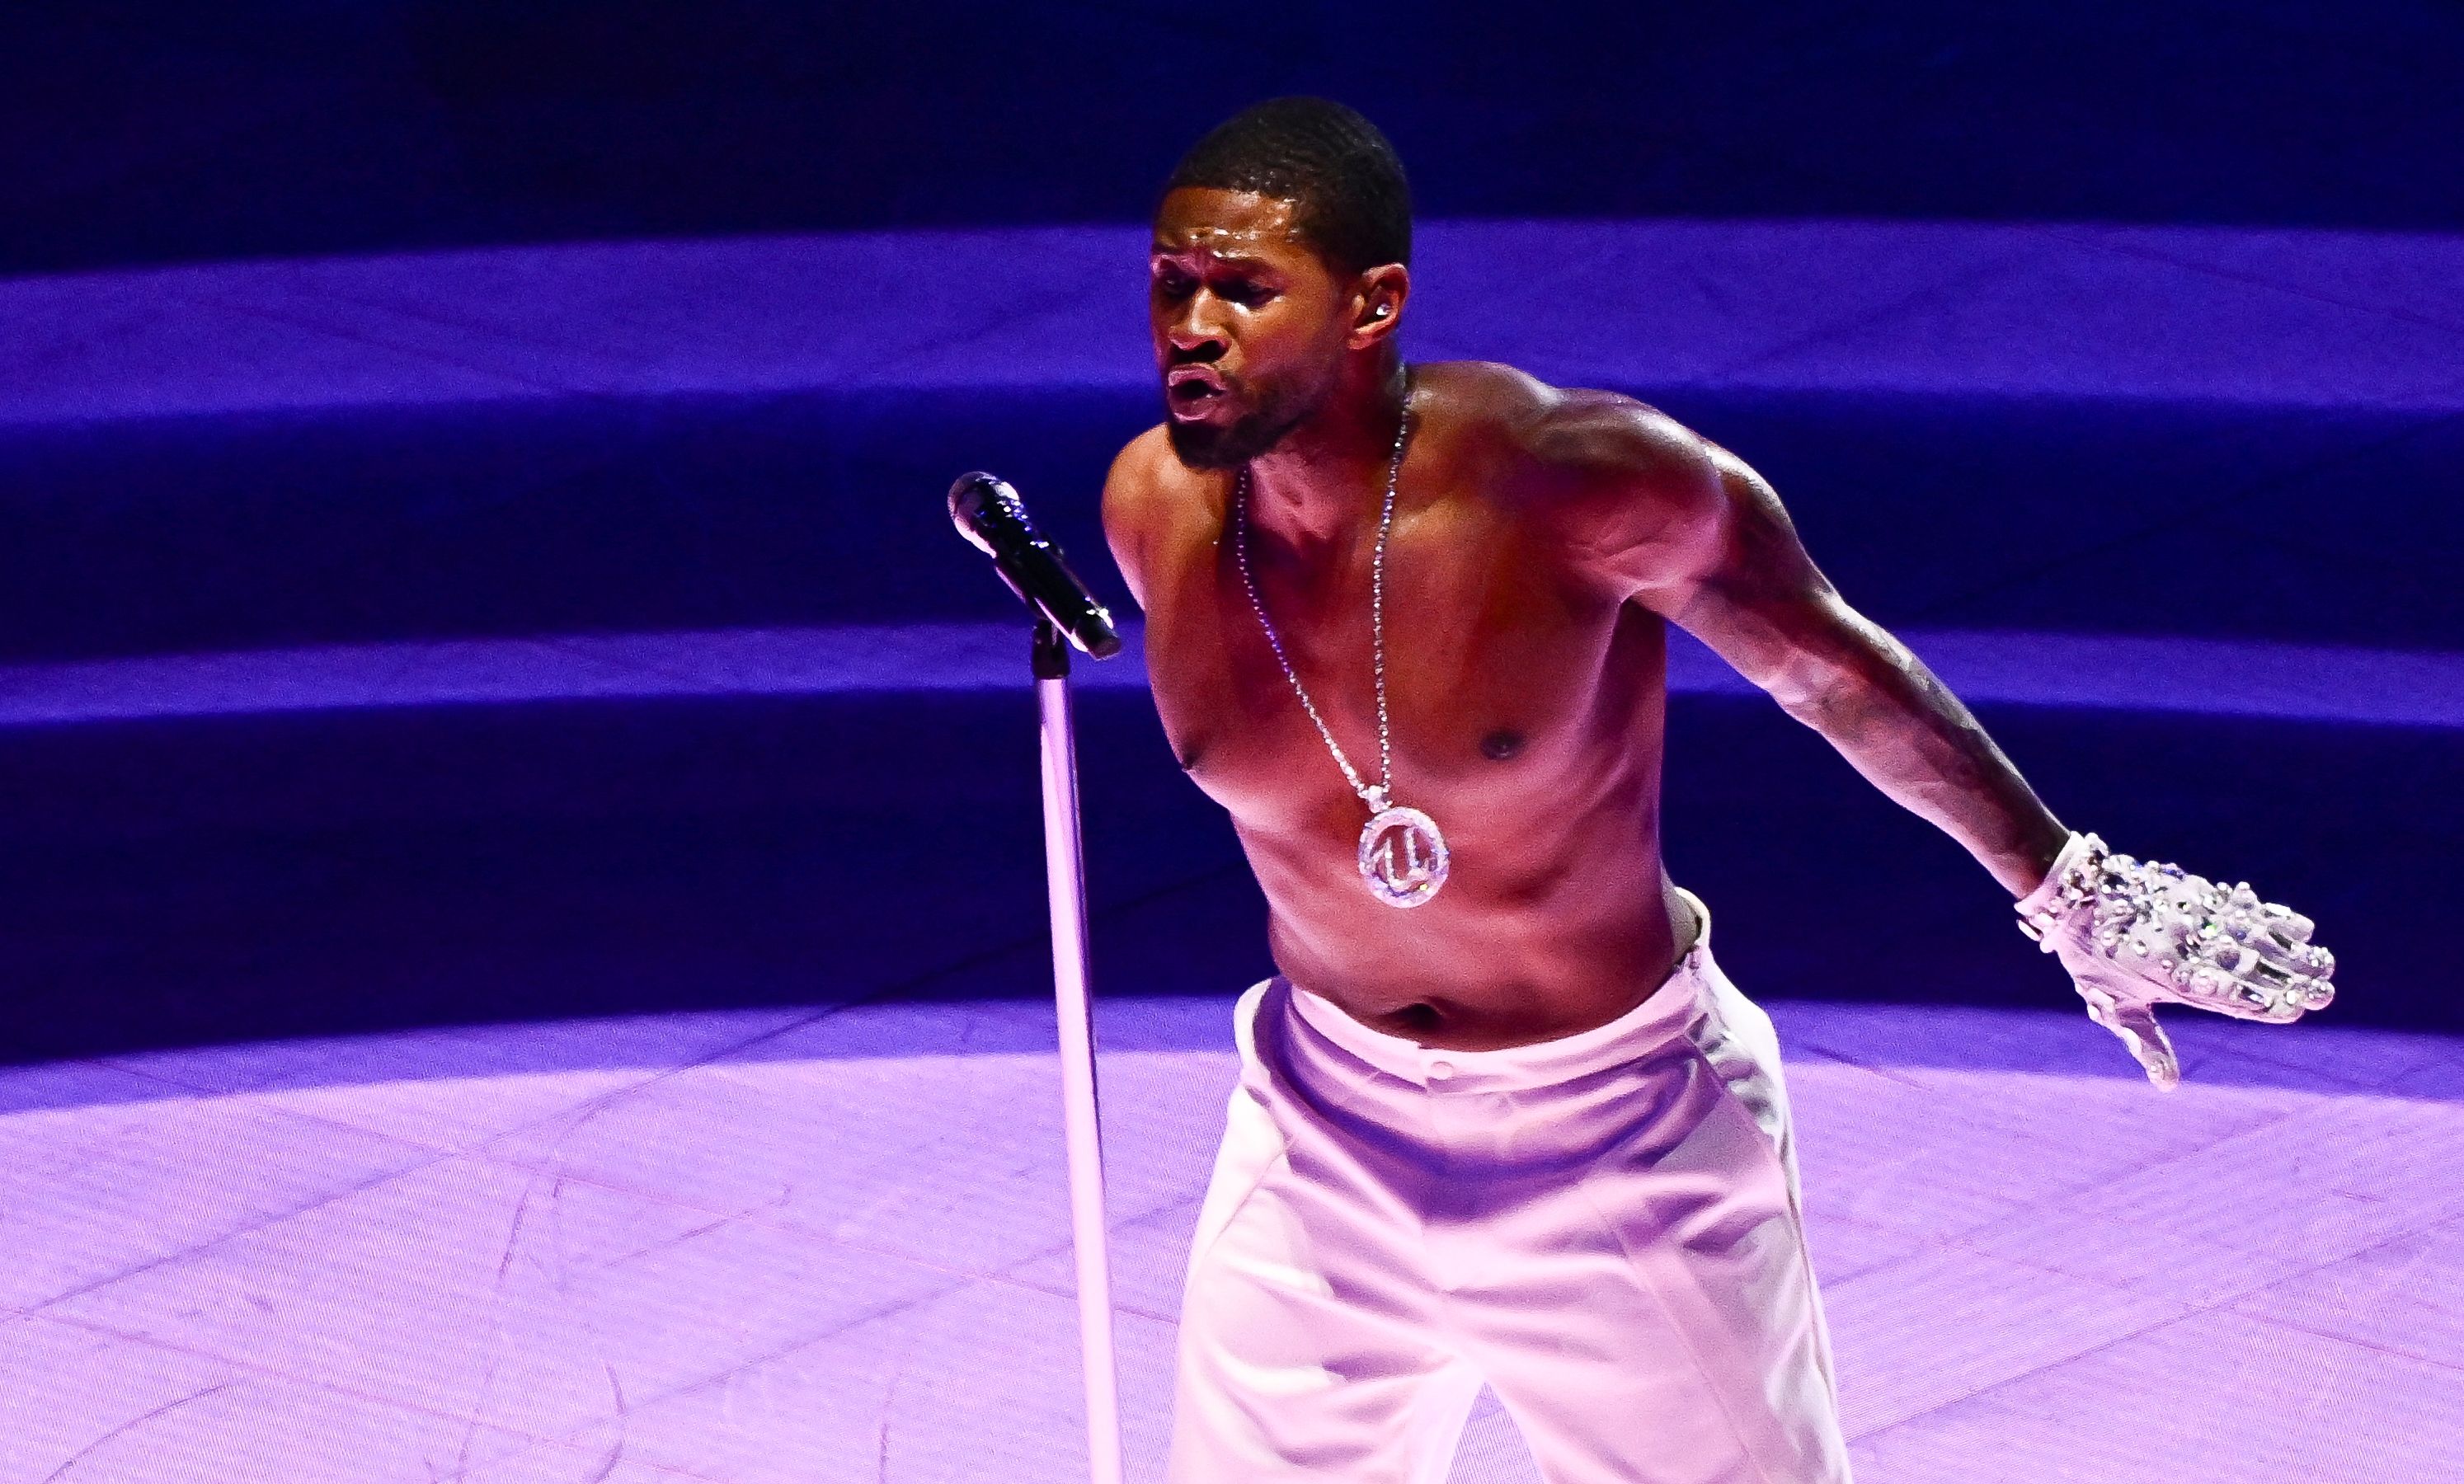 Usher, 45, Showed Off His Ripped Physique at the Super Bowl